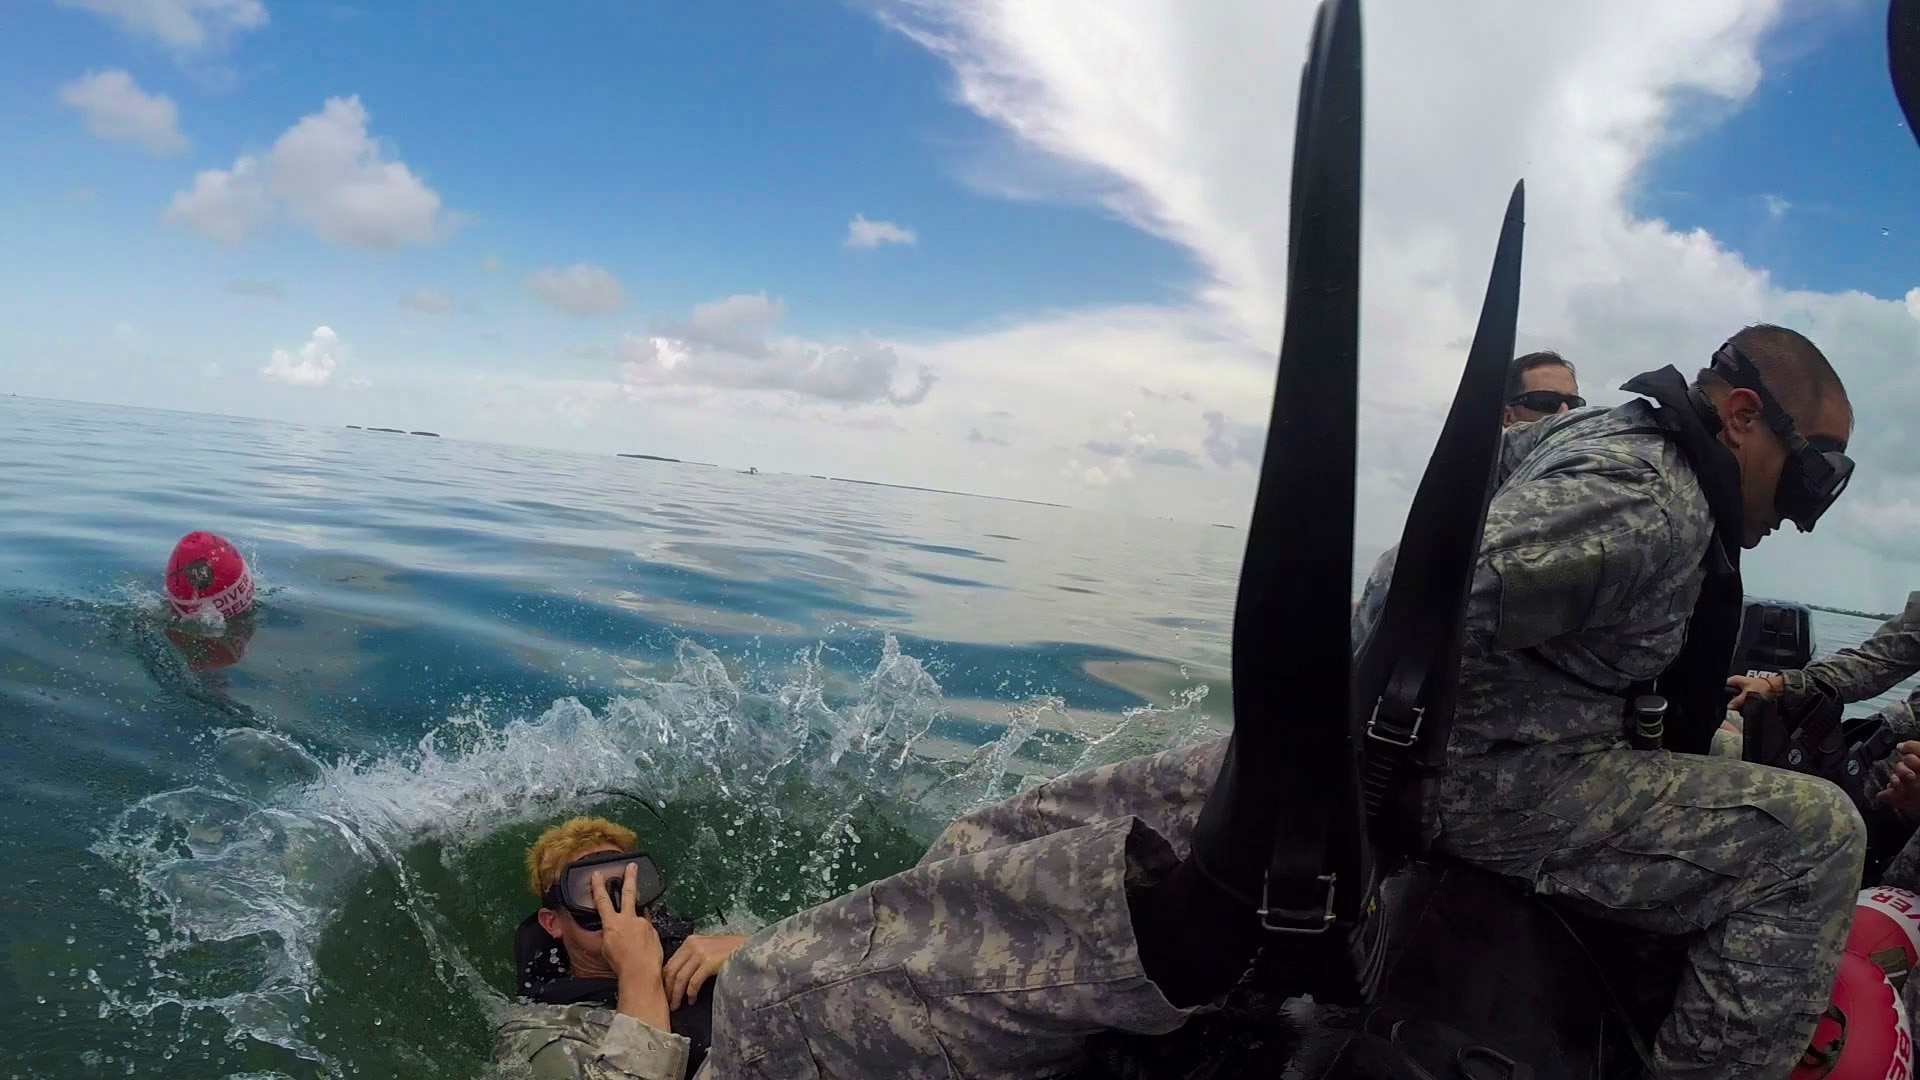 A Soldier from 20th Special Forces Group, Army National Guard, performs a back roll entry into the water during training and re-certification at the U.S. Army Special Forces Underwater Operations School, June 22, 2014 in Key West, Florida. Even after their initial training to be part of Special Forces, Soldiers - known as Green Berets - must continue to attend schools and train just to maintain proficiency in their specialty skill sets, like combat diver.